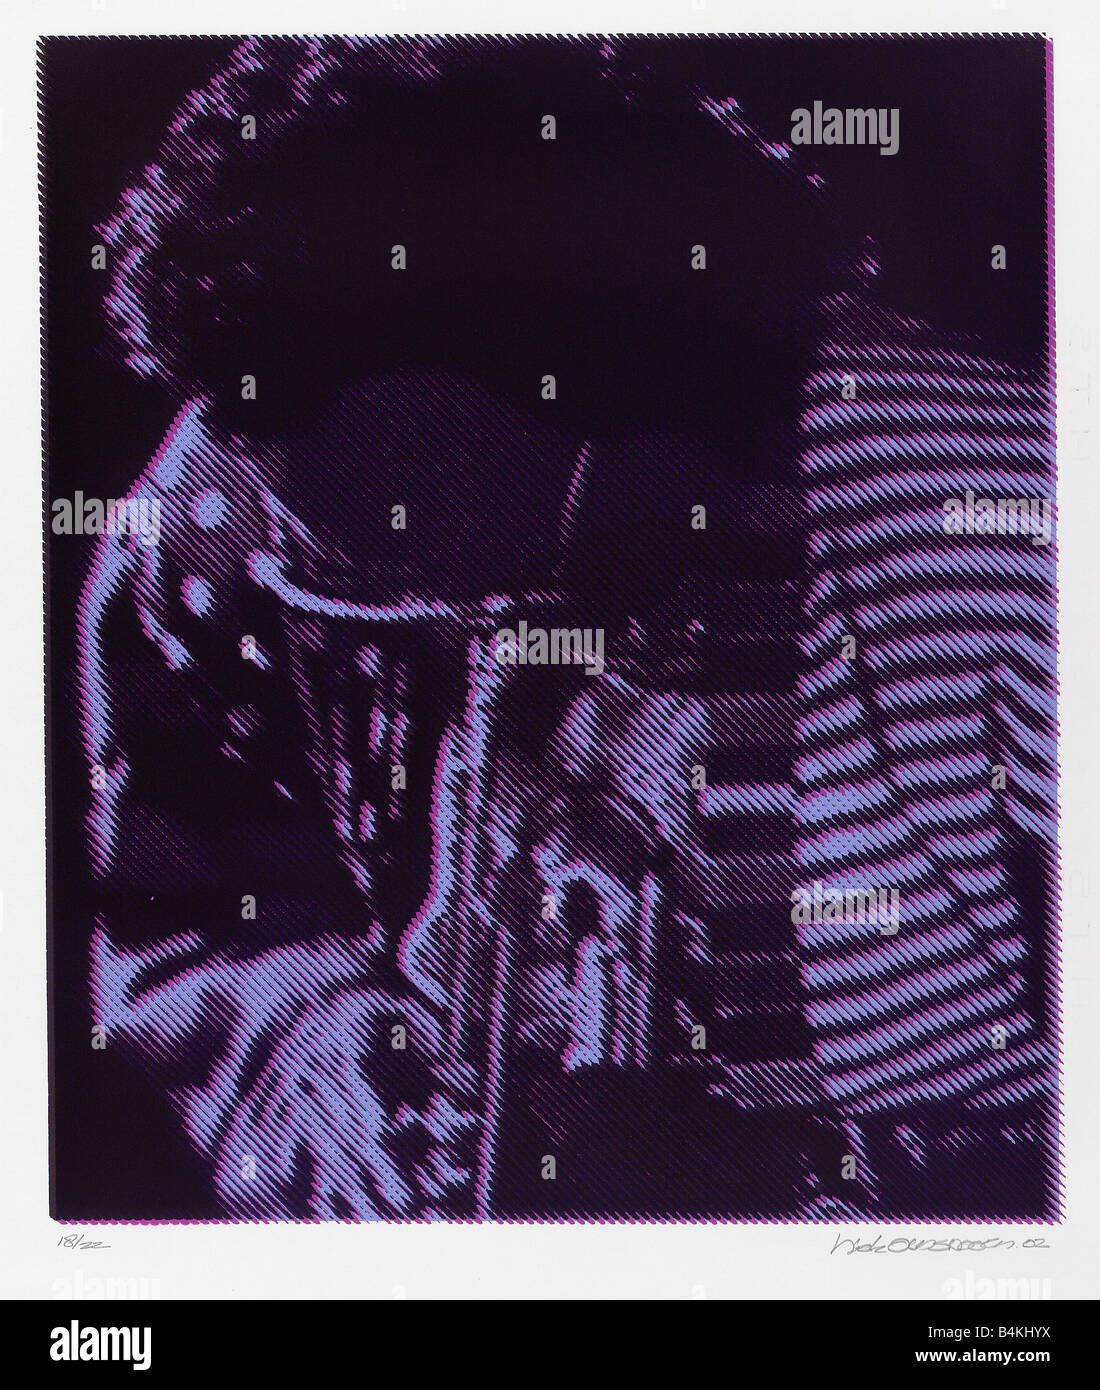 Miles Davis, 1926-1991, American jazz trumpeter, bandleader,composer, silkscreen made of a picture, by nick oudshoorn Stock Photo